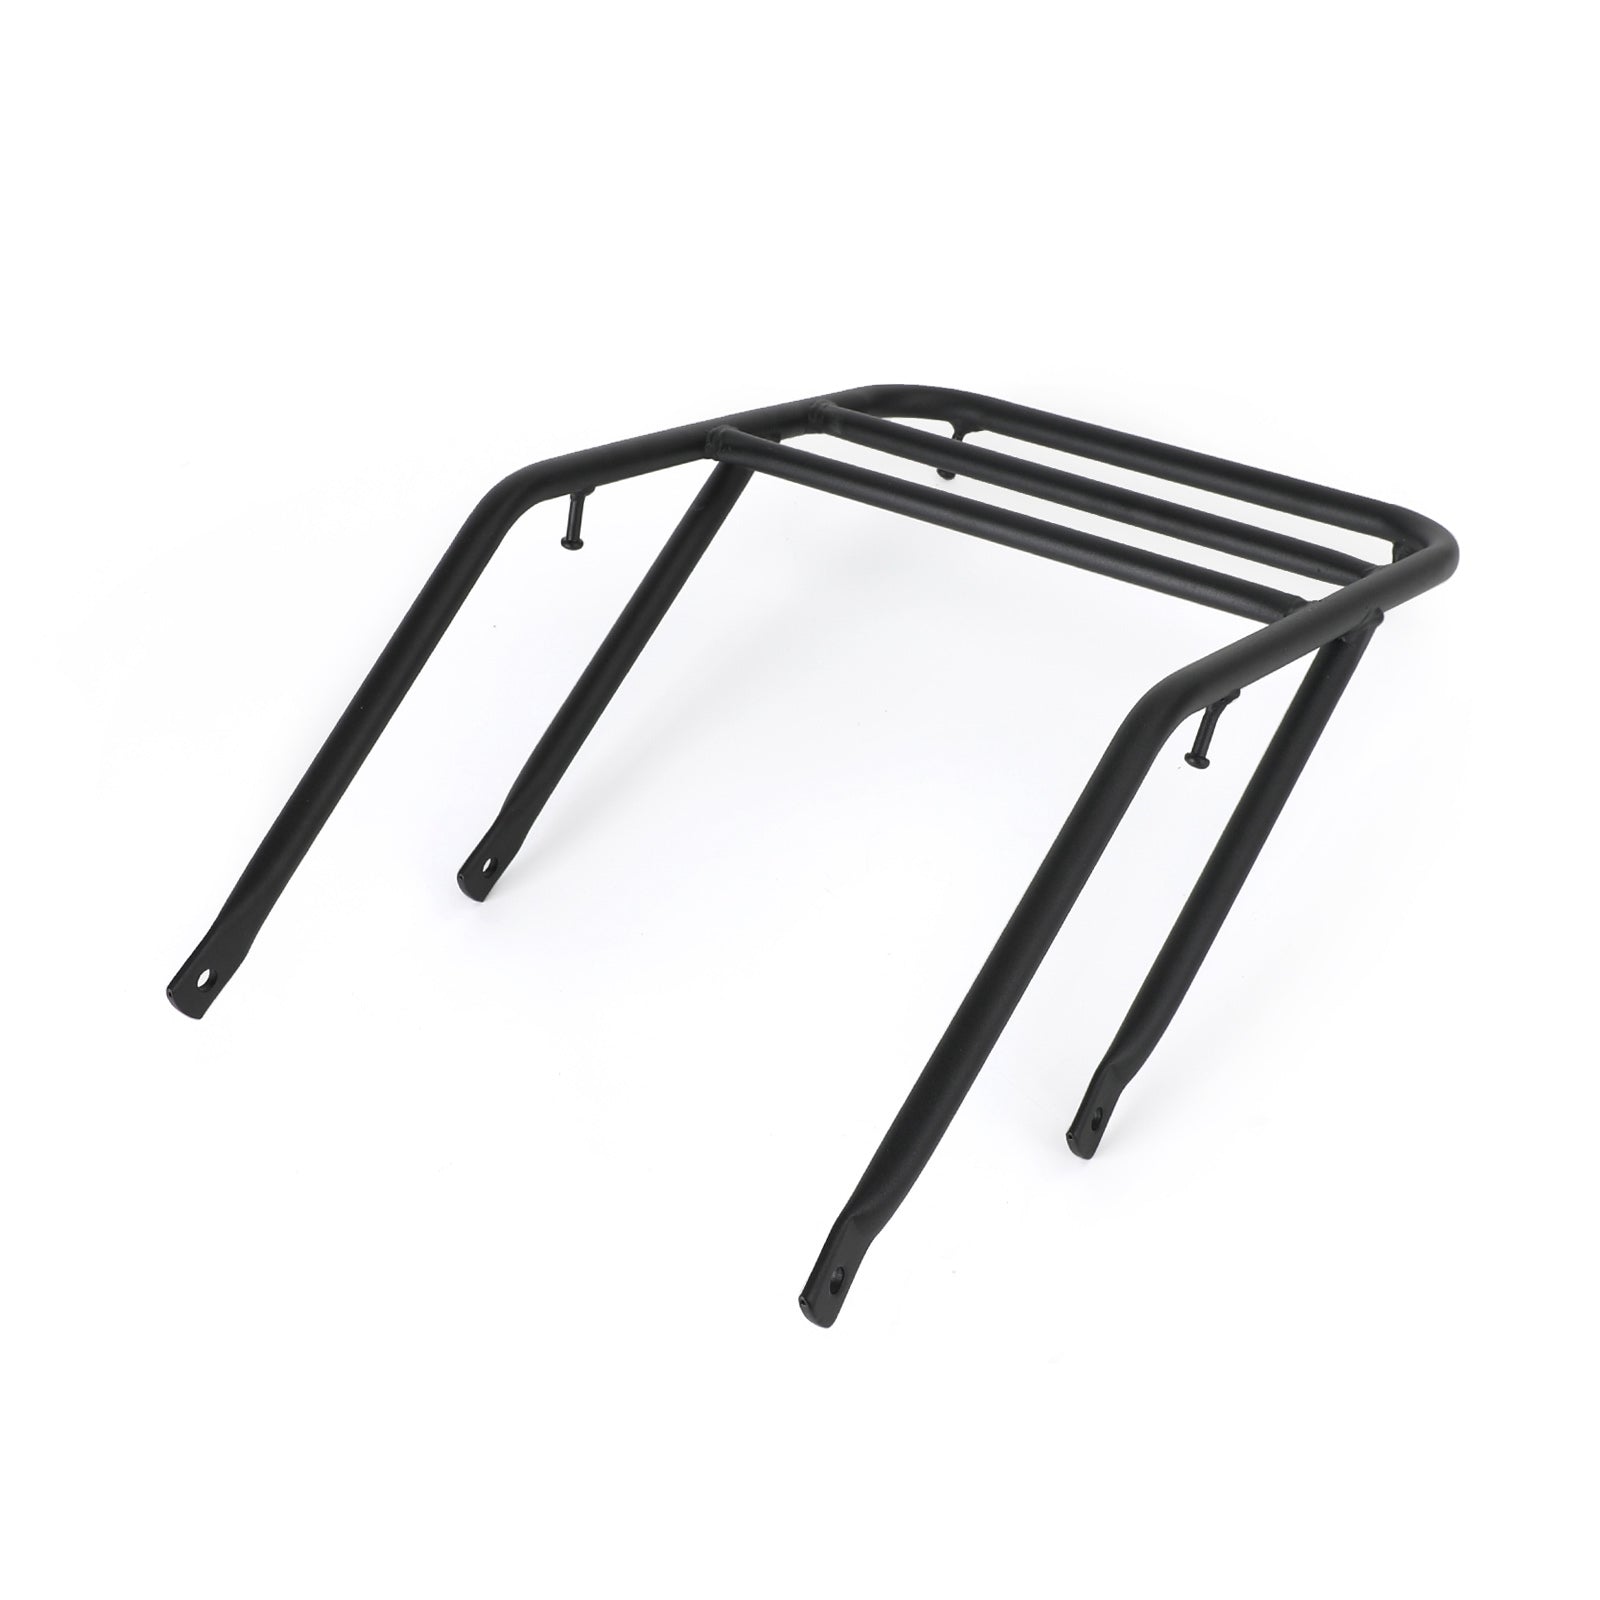 REAR STEEL LUGGAGE CARRY SUPPORT RACK FOR HONDA REBEL CMX 1100 / DCT 2021 2022 Generic